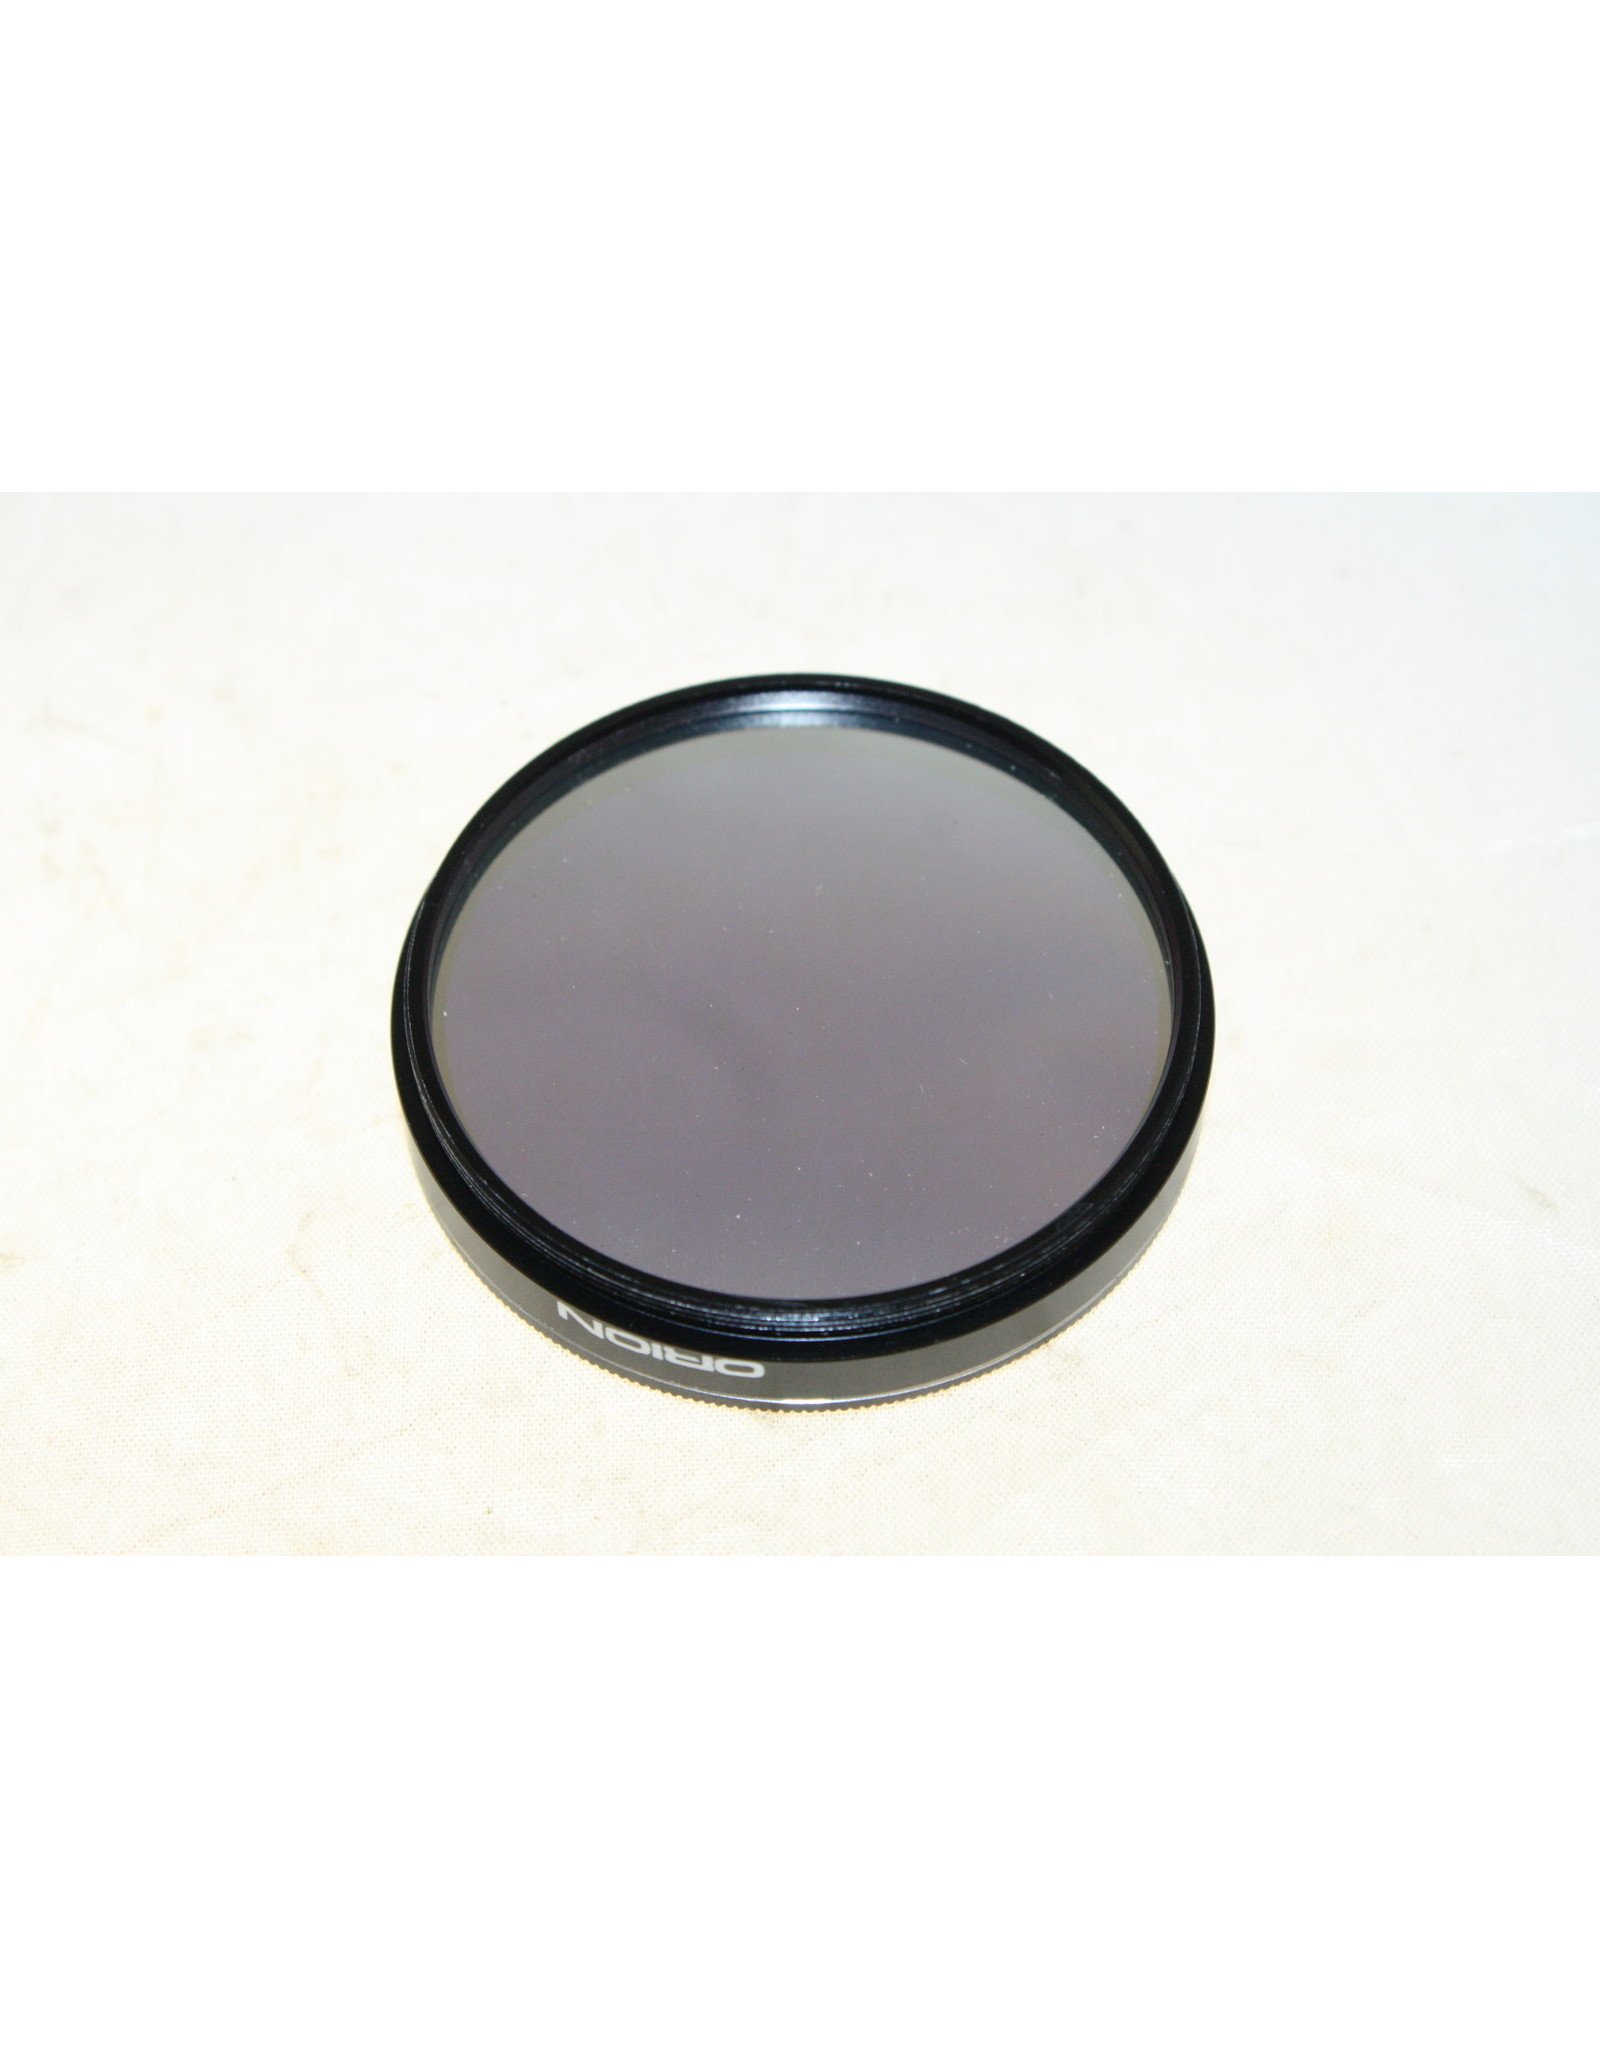 Orion Orion H-Beta 2" Eyepiece Filter (Pre-owned)